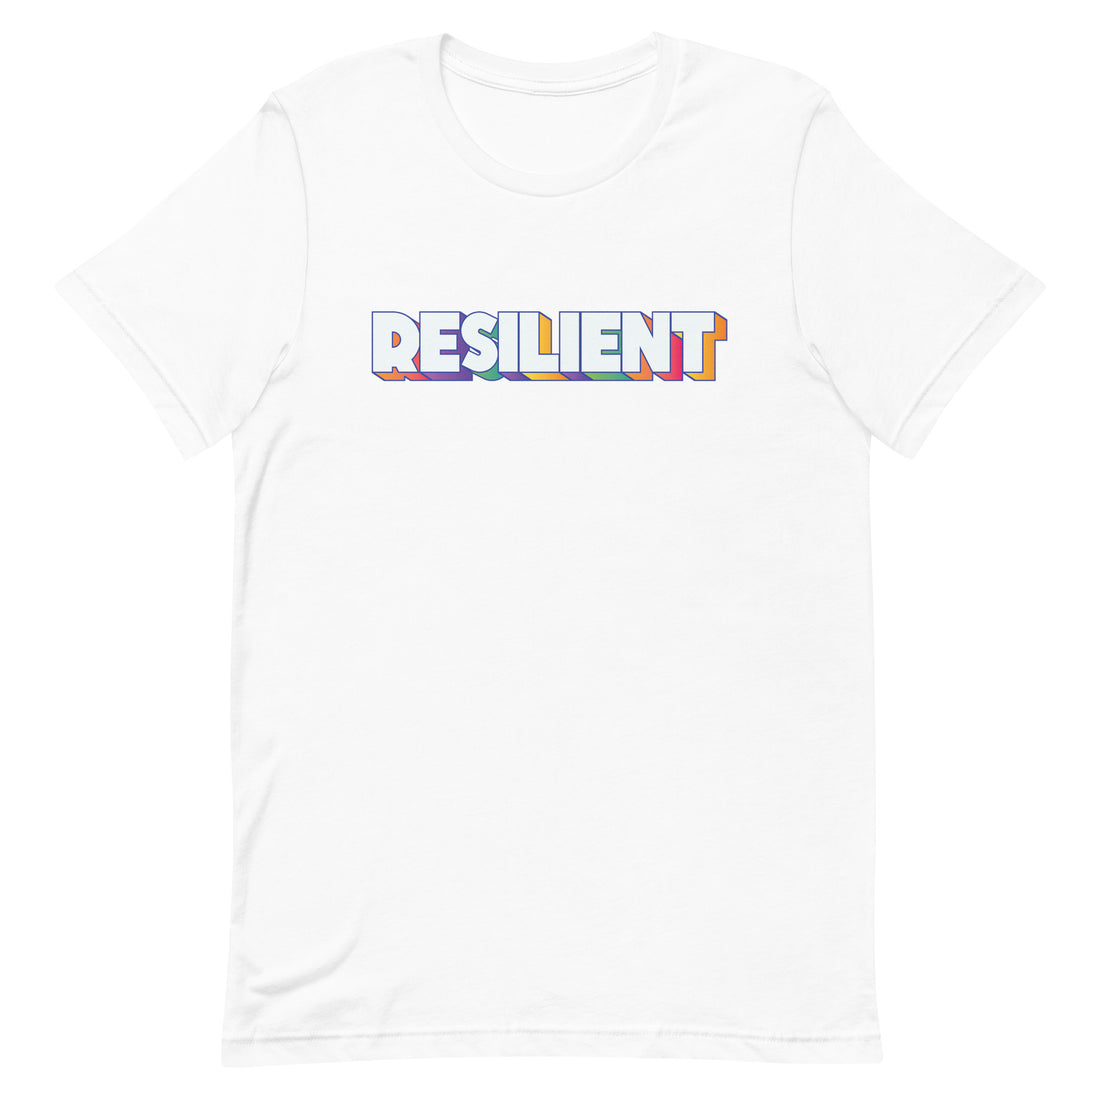 Resilient